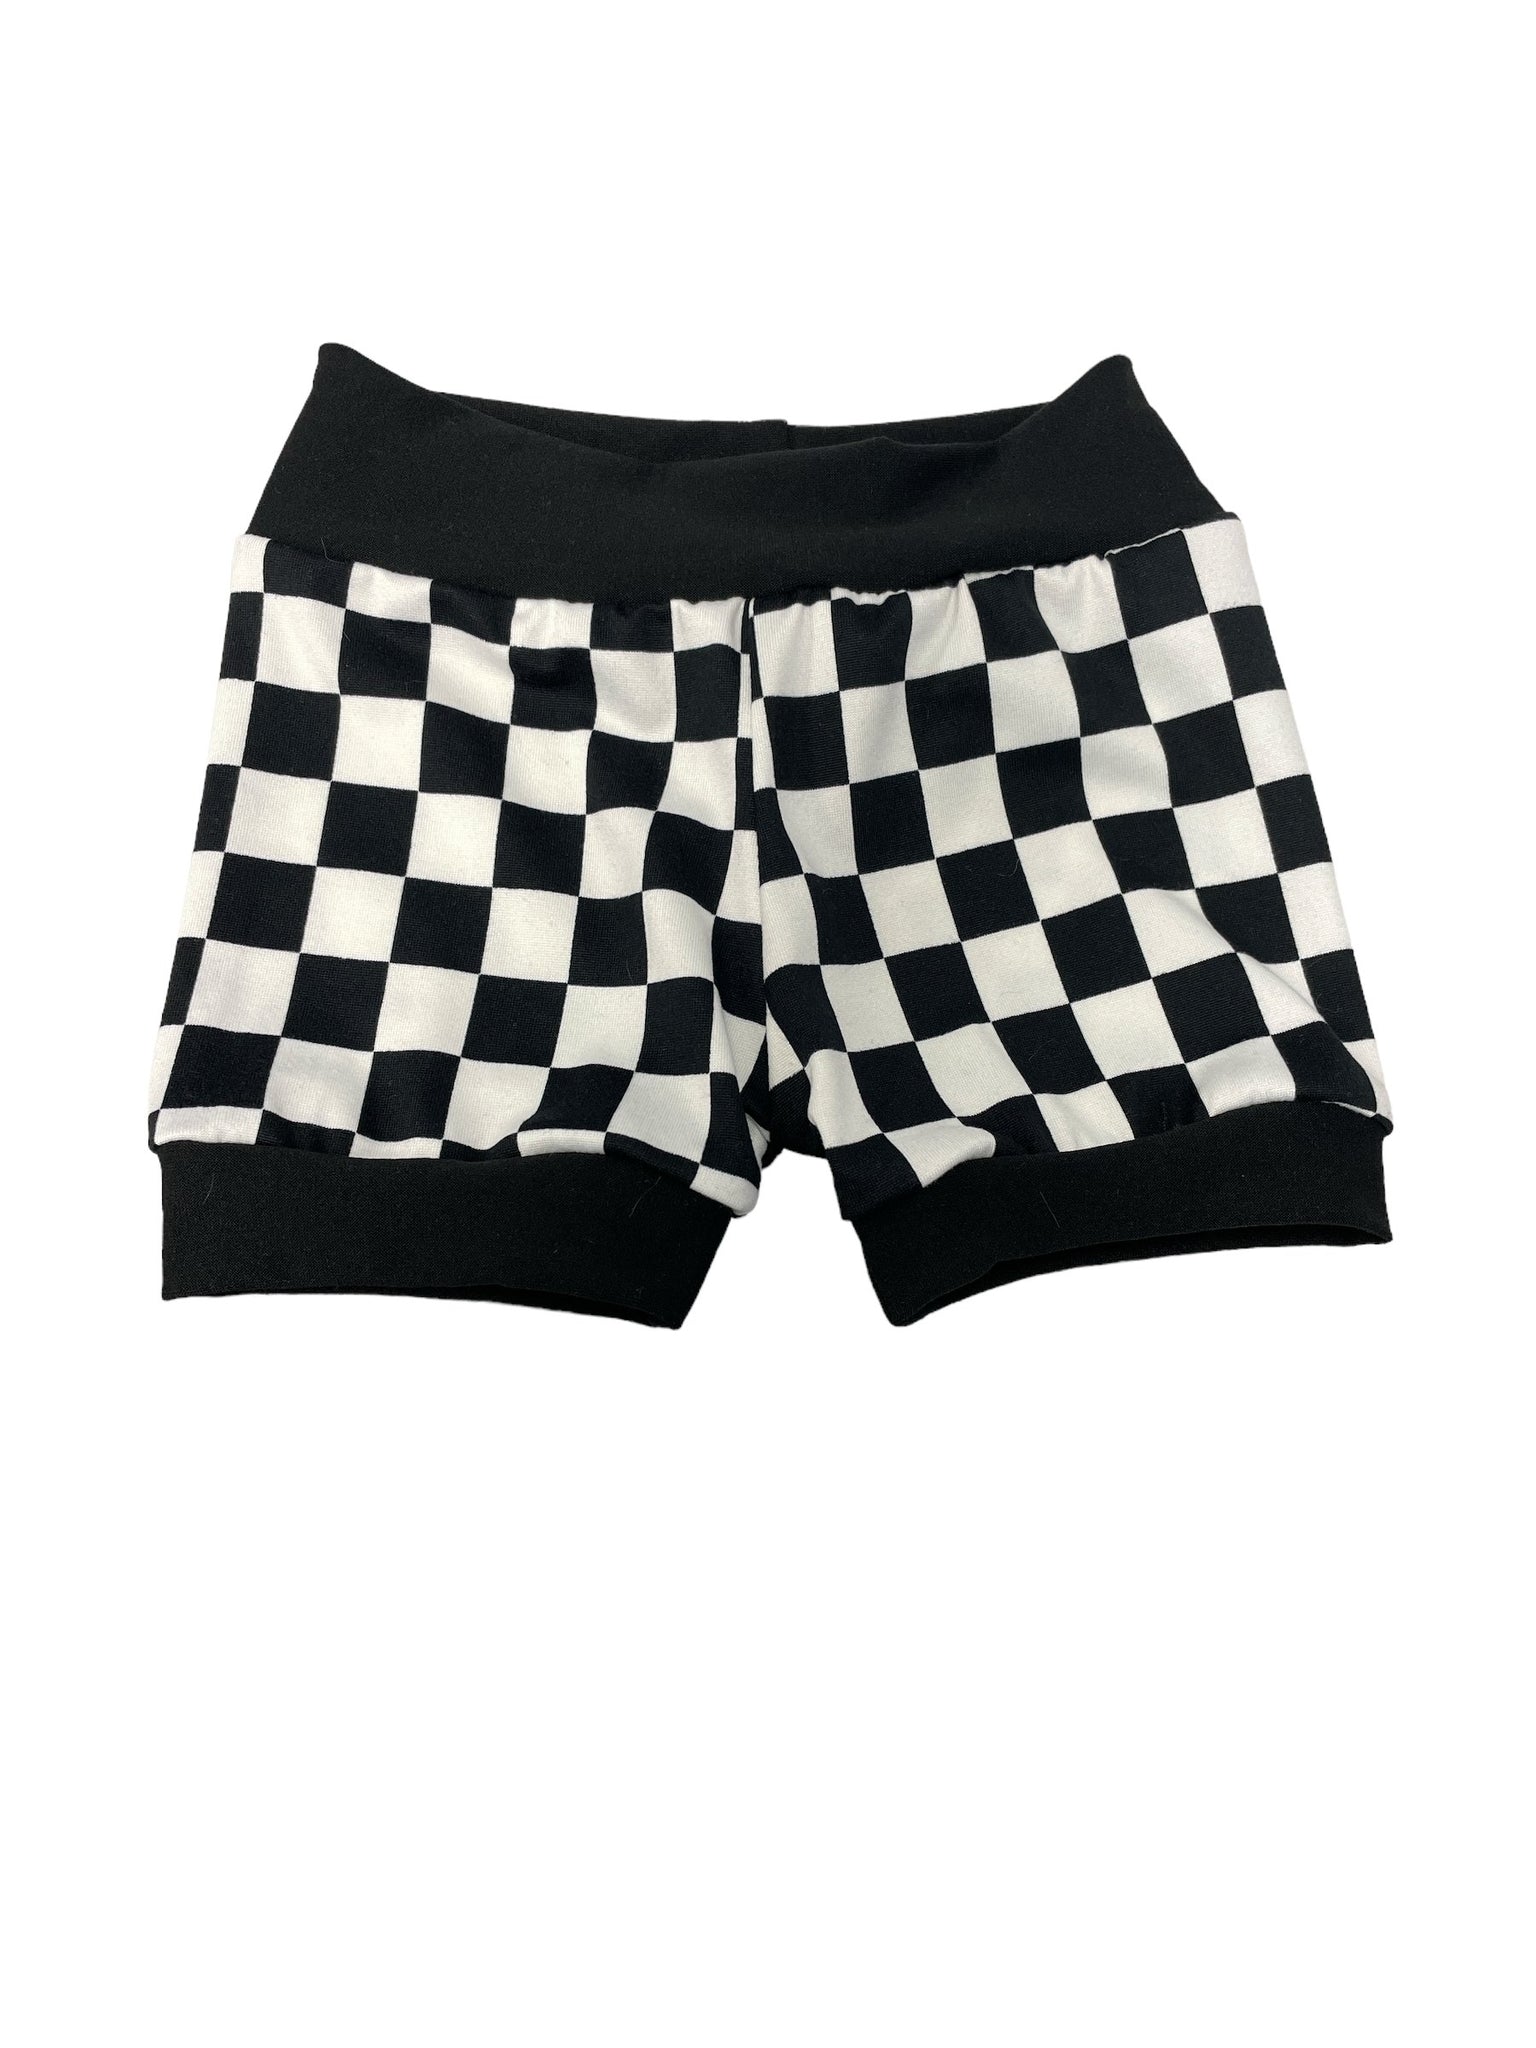 Checkered • Infant/Toddler Shorties - Rise and Redemption